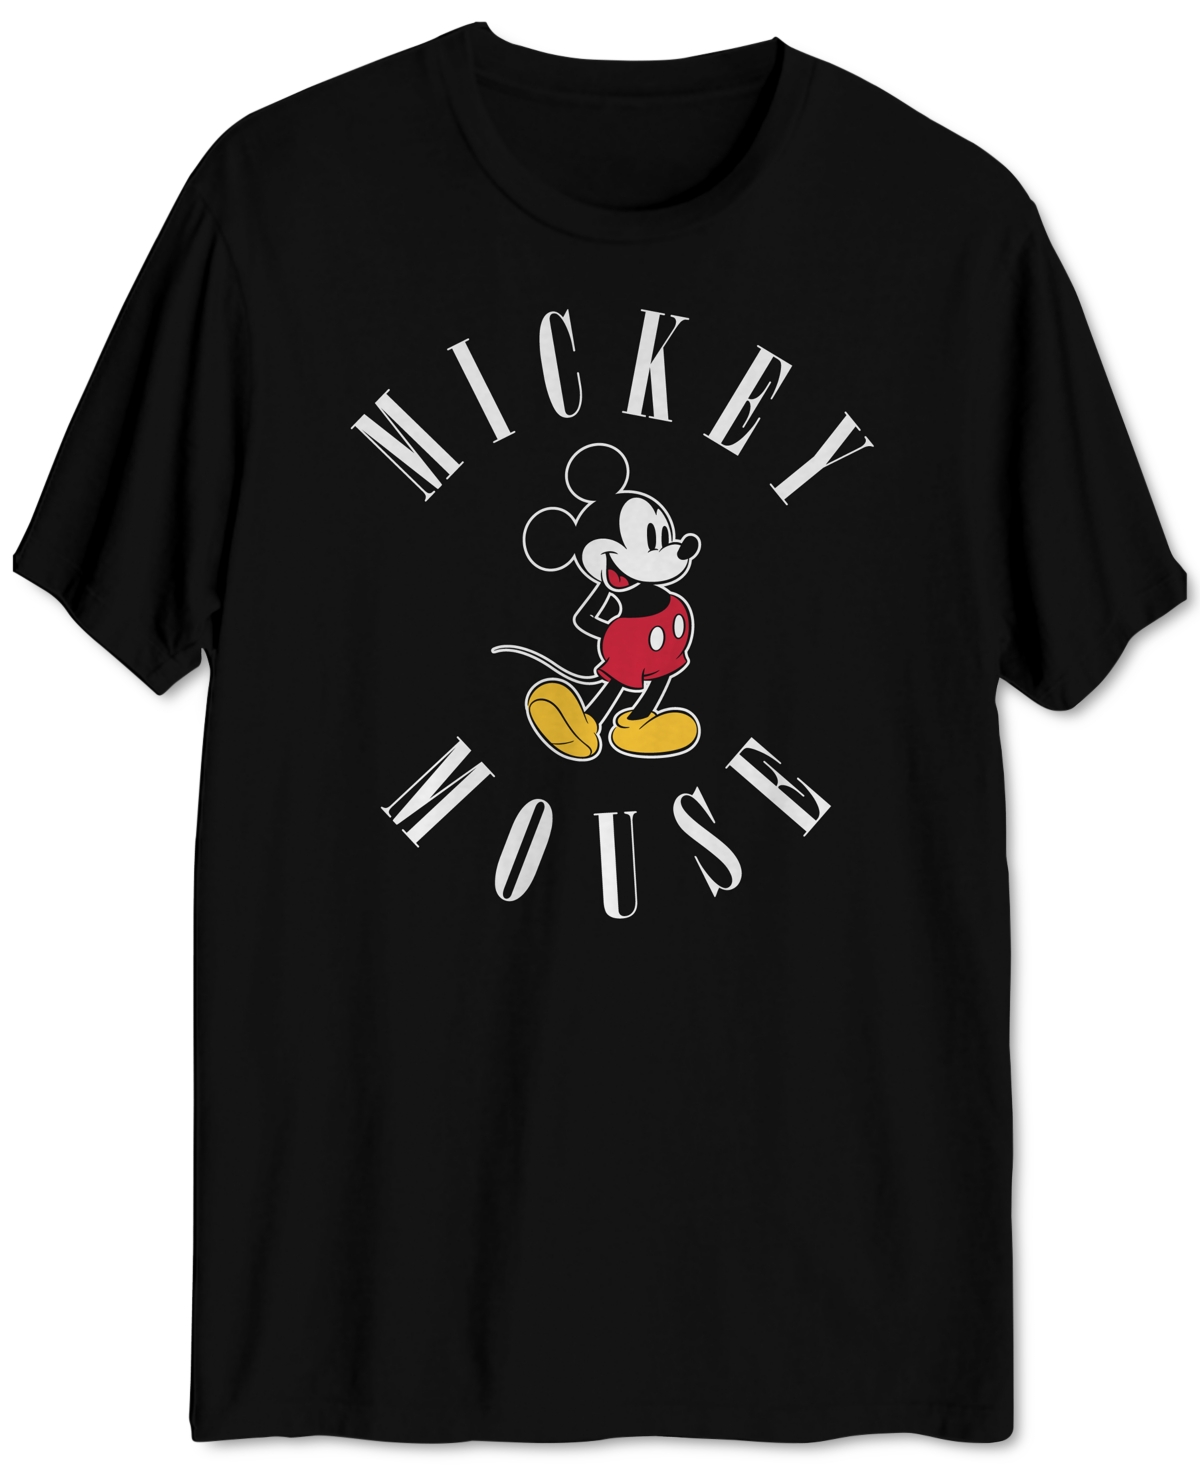 Hybrid Nineties Mickey Mouse Men's Graphic T-Shirt